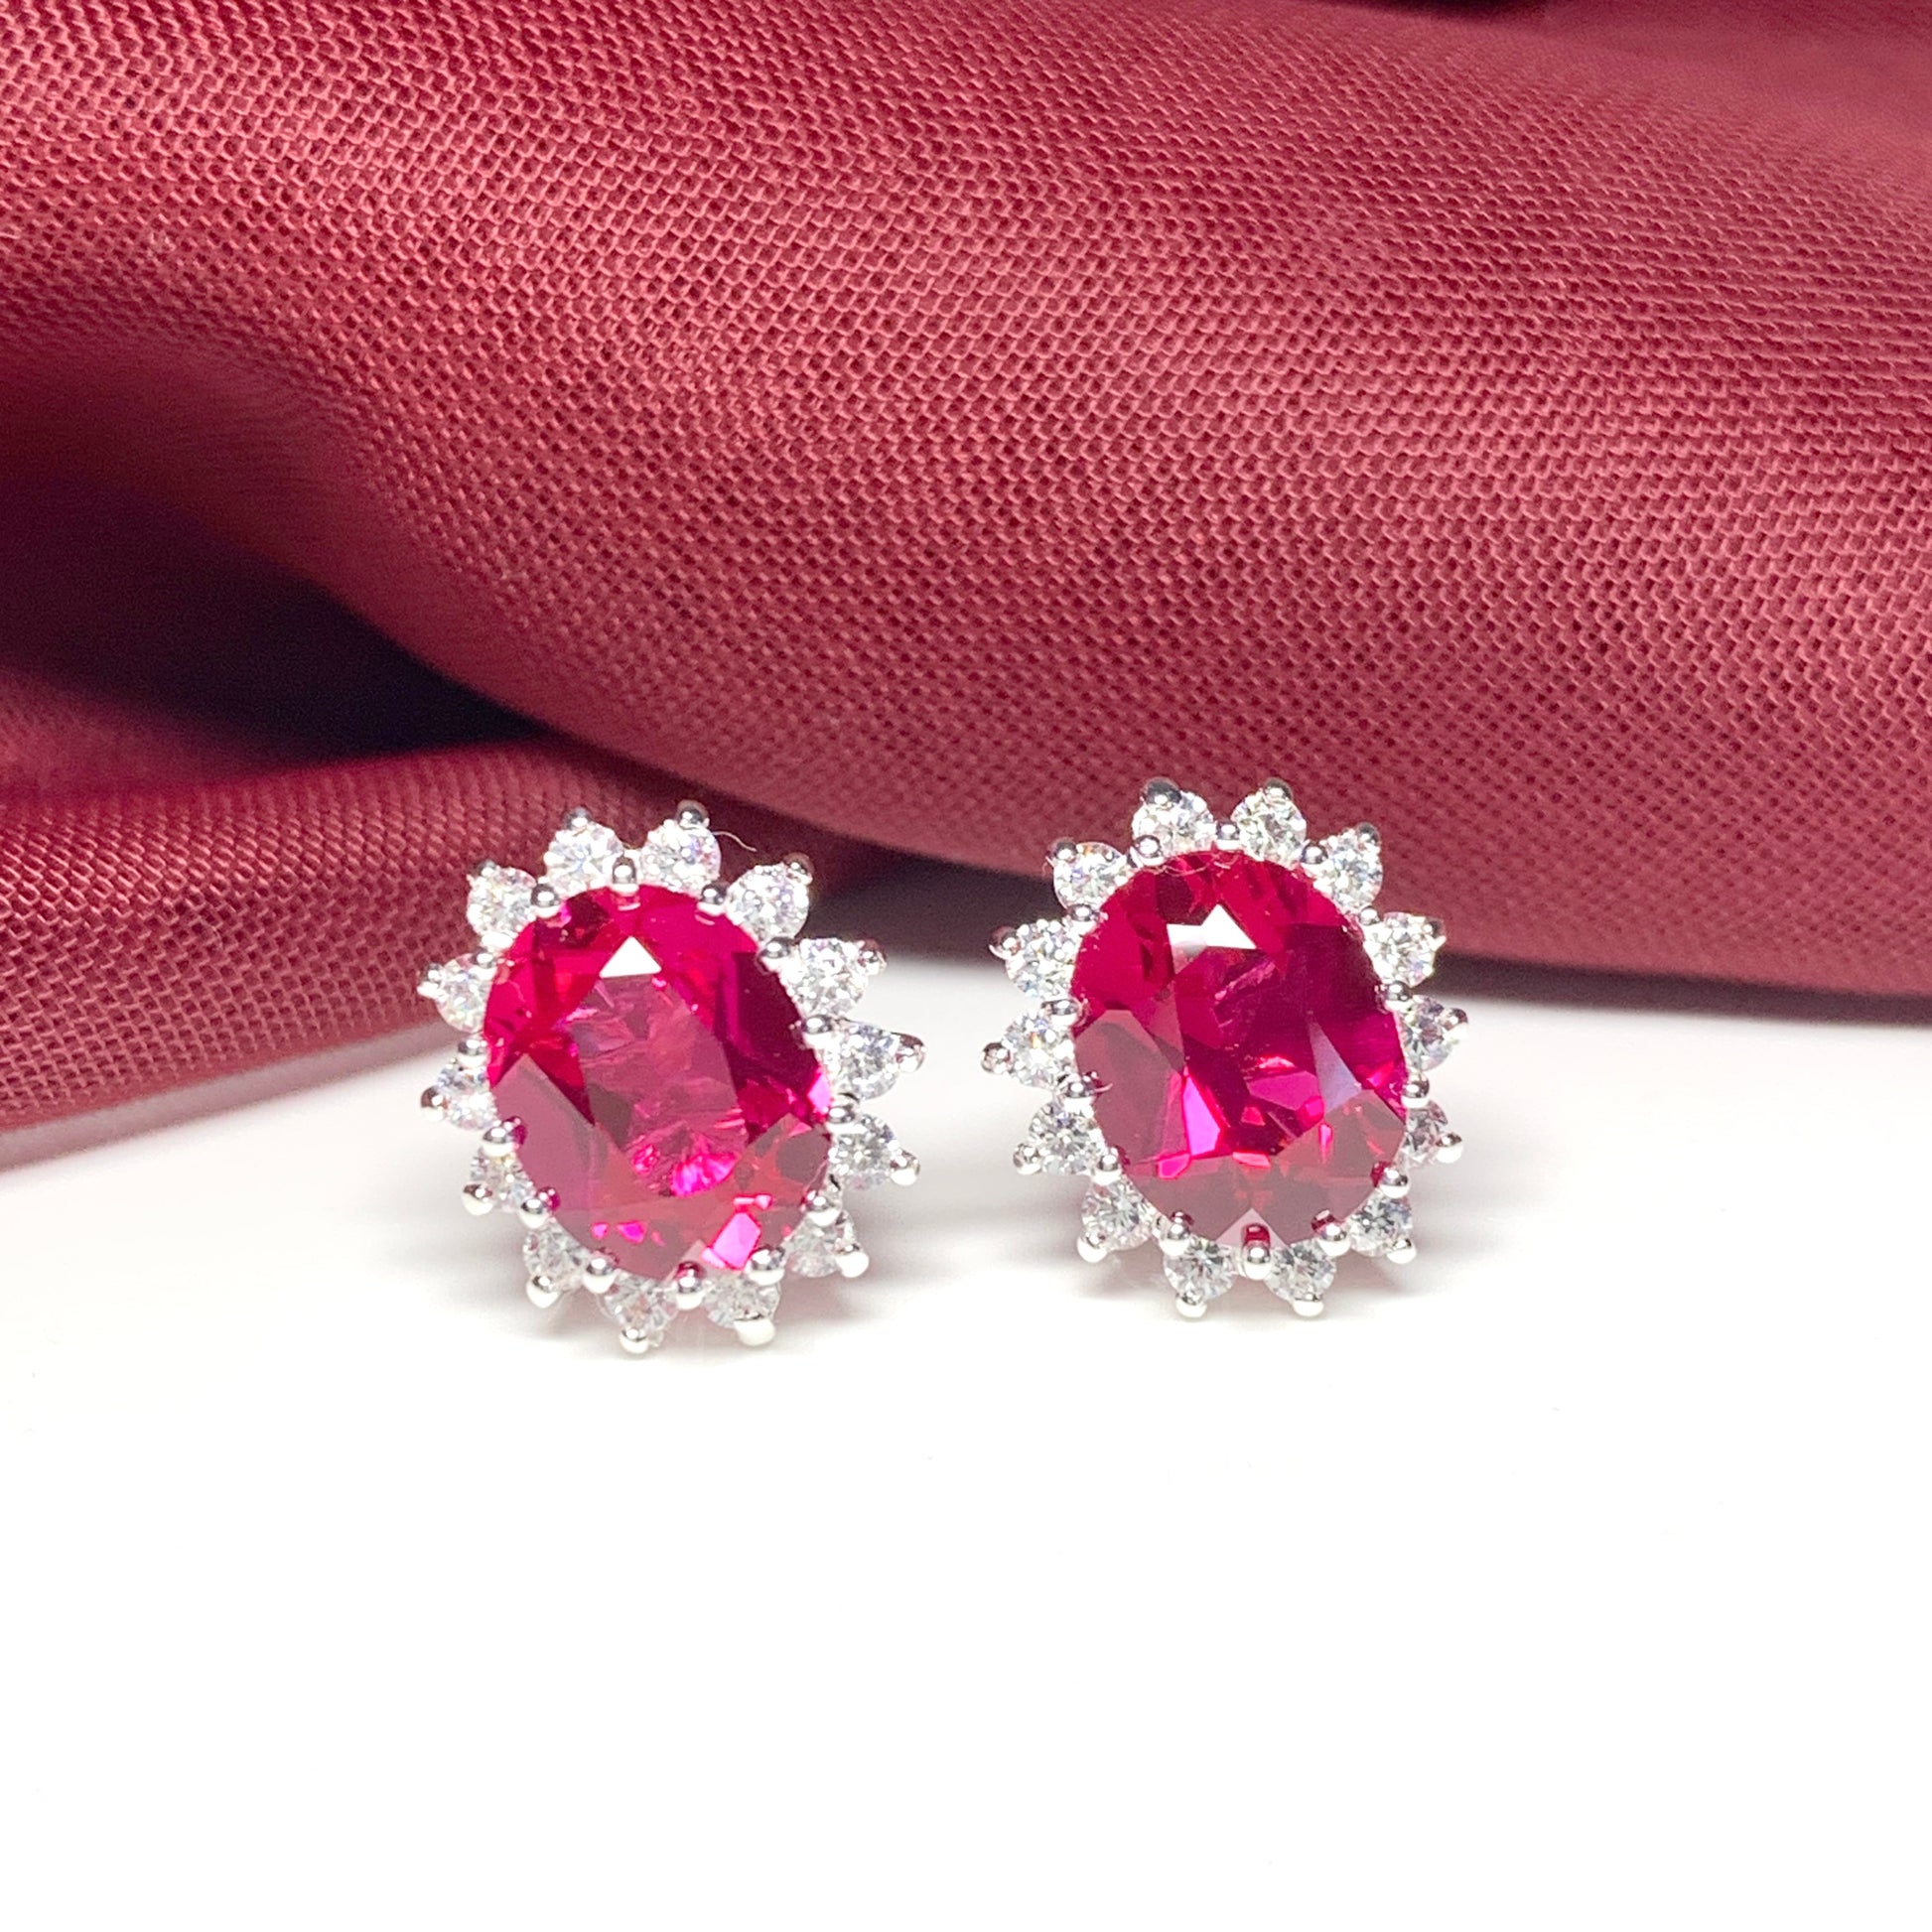 Large bright ruby red and white cubic zirconia oval cluster dress cocktail stud earrings